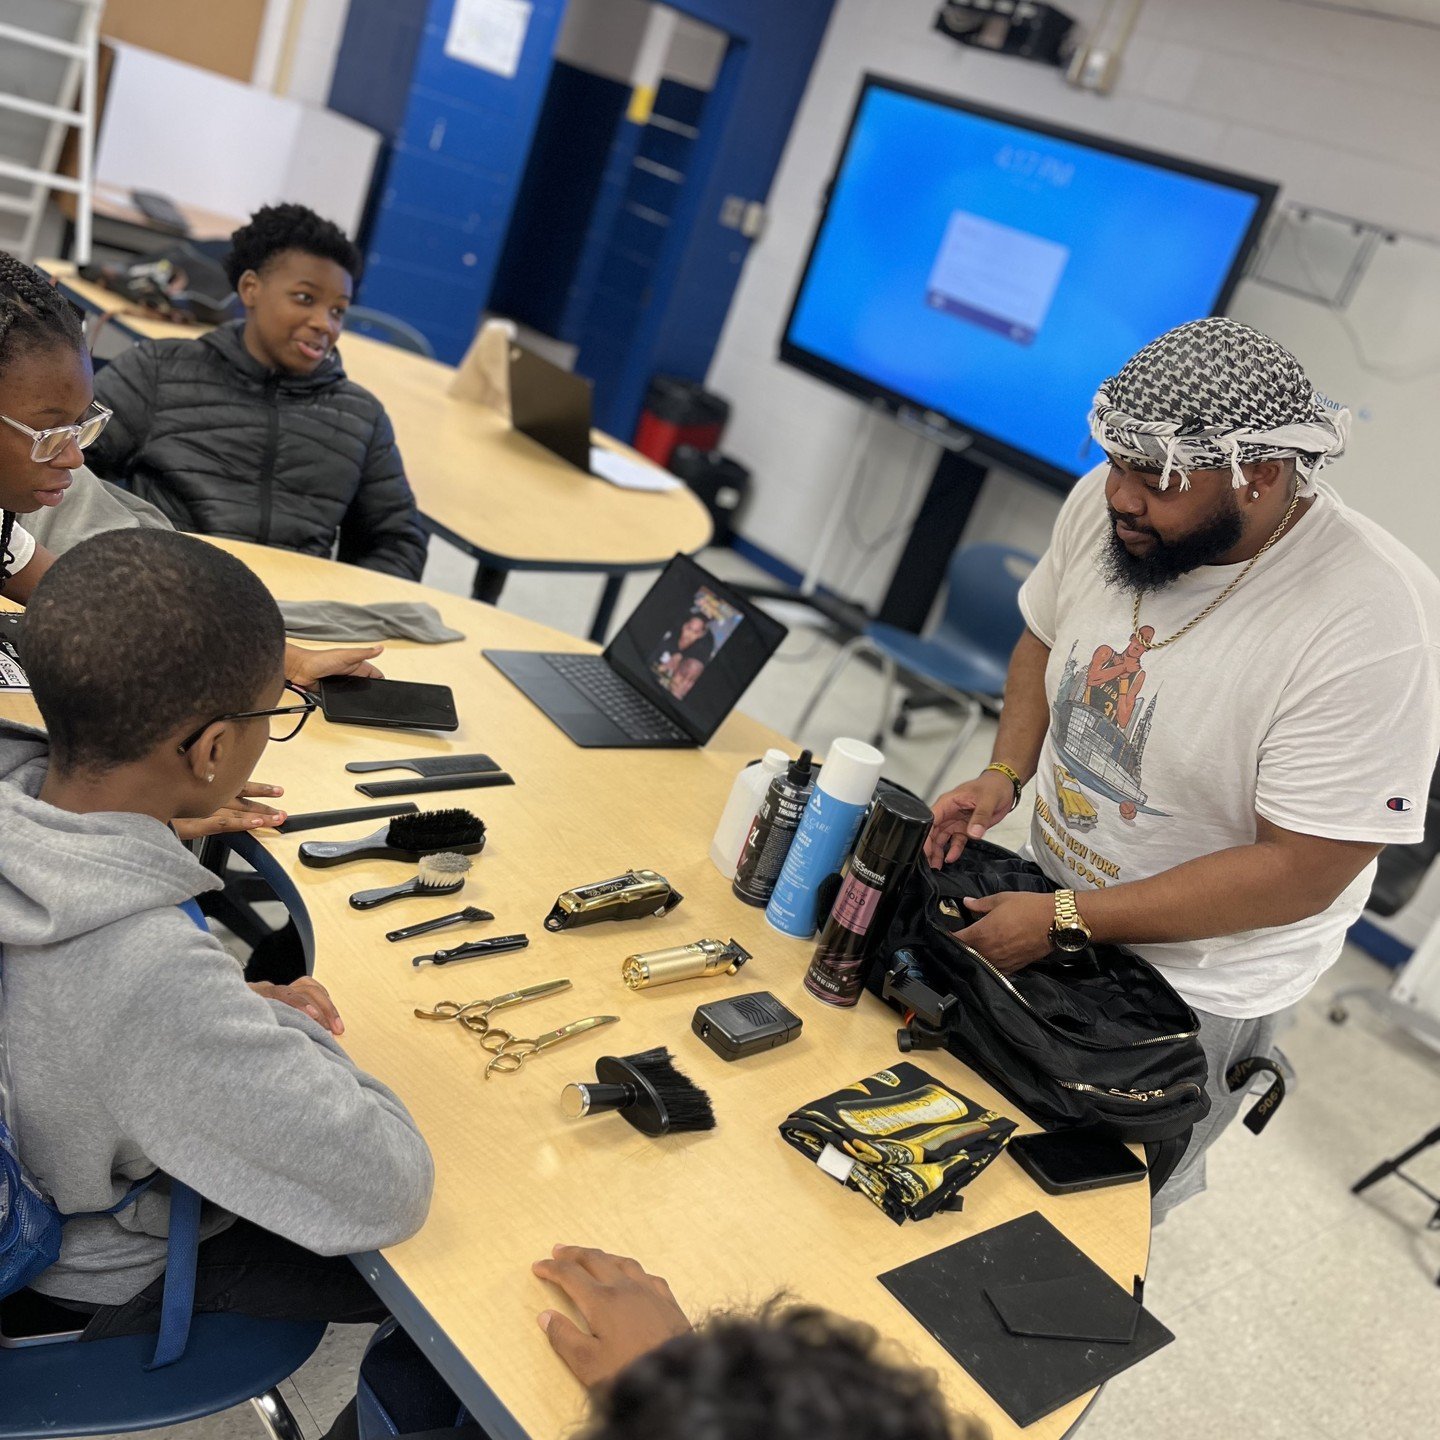 Cutting-edge learning! In addition to hands-on skills, Sean from Shizzy Cuts @shizzy_cutz talked to Petersburg Club members about how barbering incorporates mentoring, relationship-building, customer service skills, math and technology! #relationship